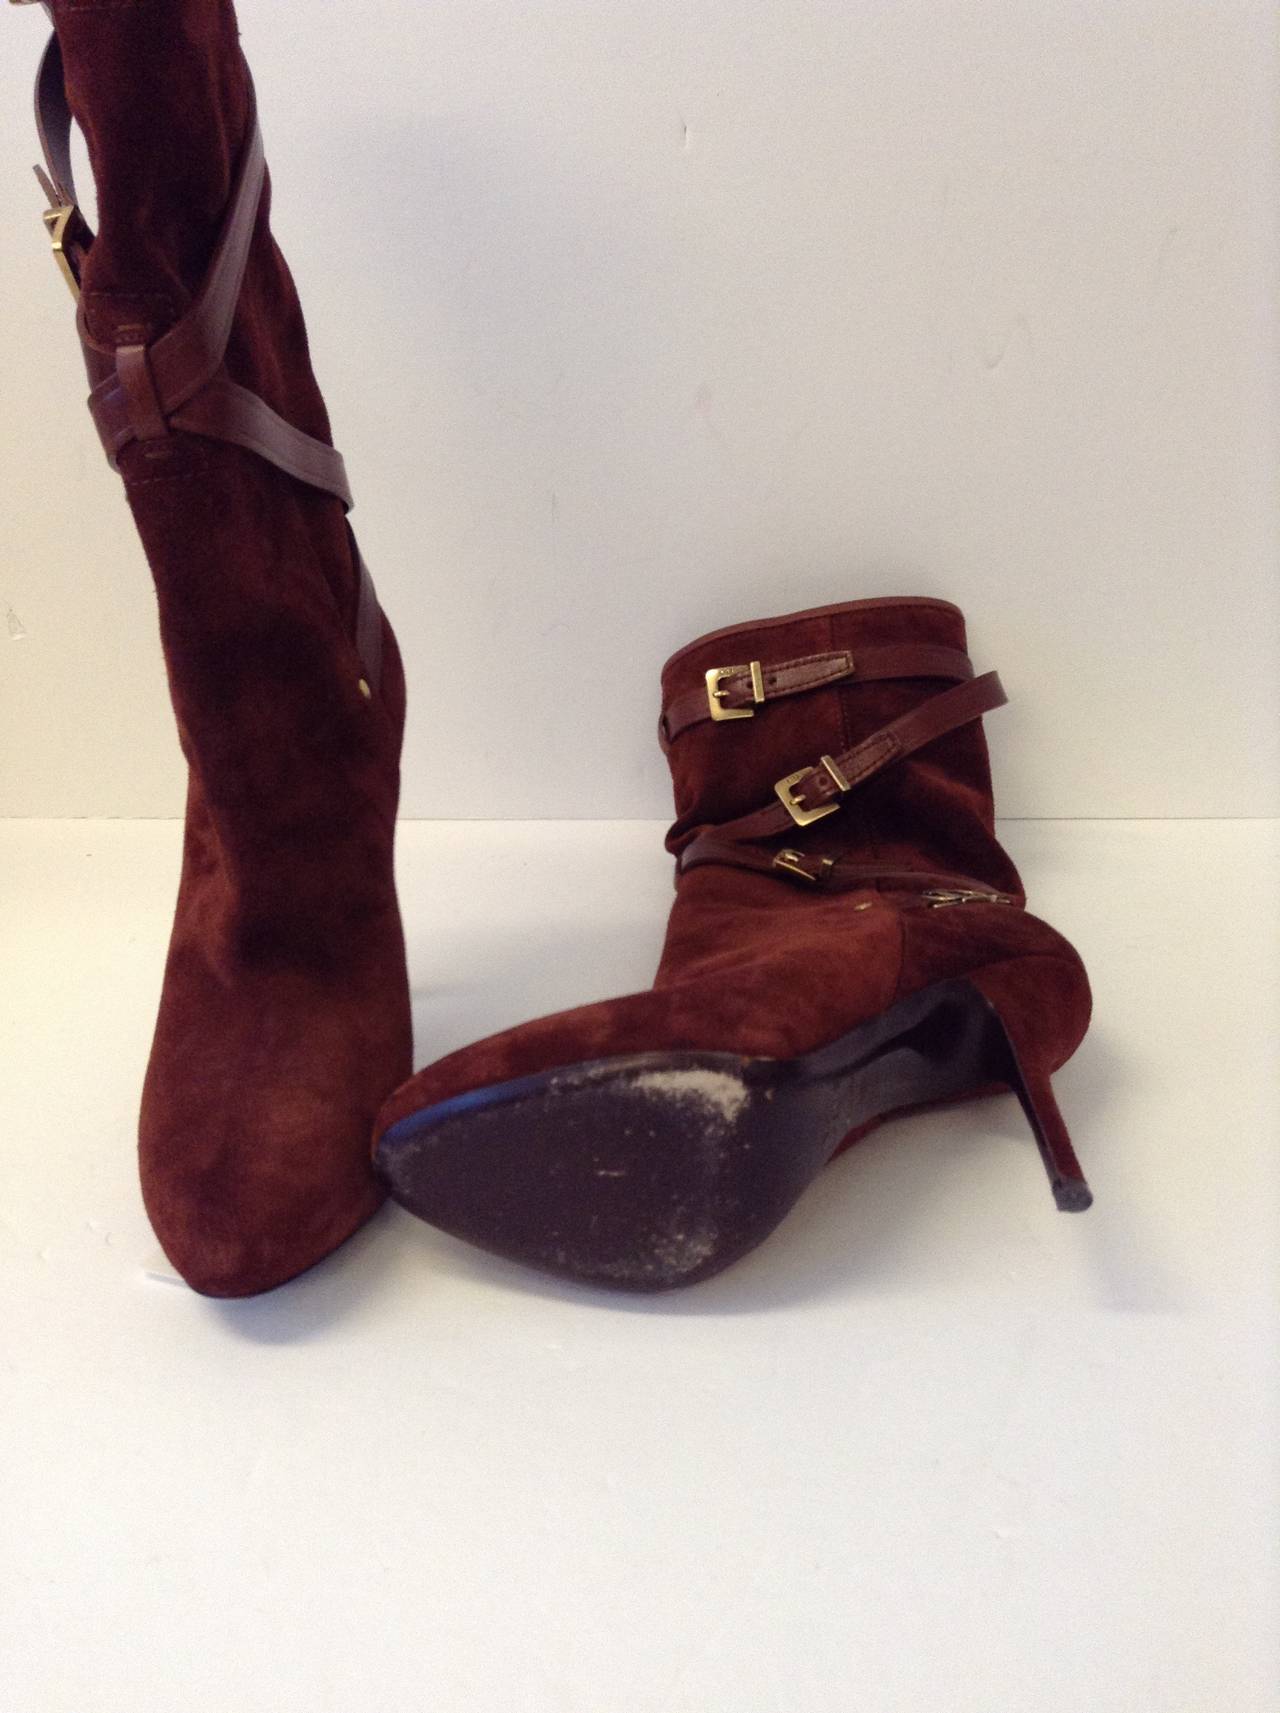 Christian Dior Suede Boots size 38.5 In Excellent Condition For Sale In Westmount, Quebec